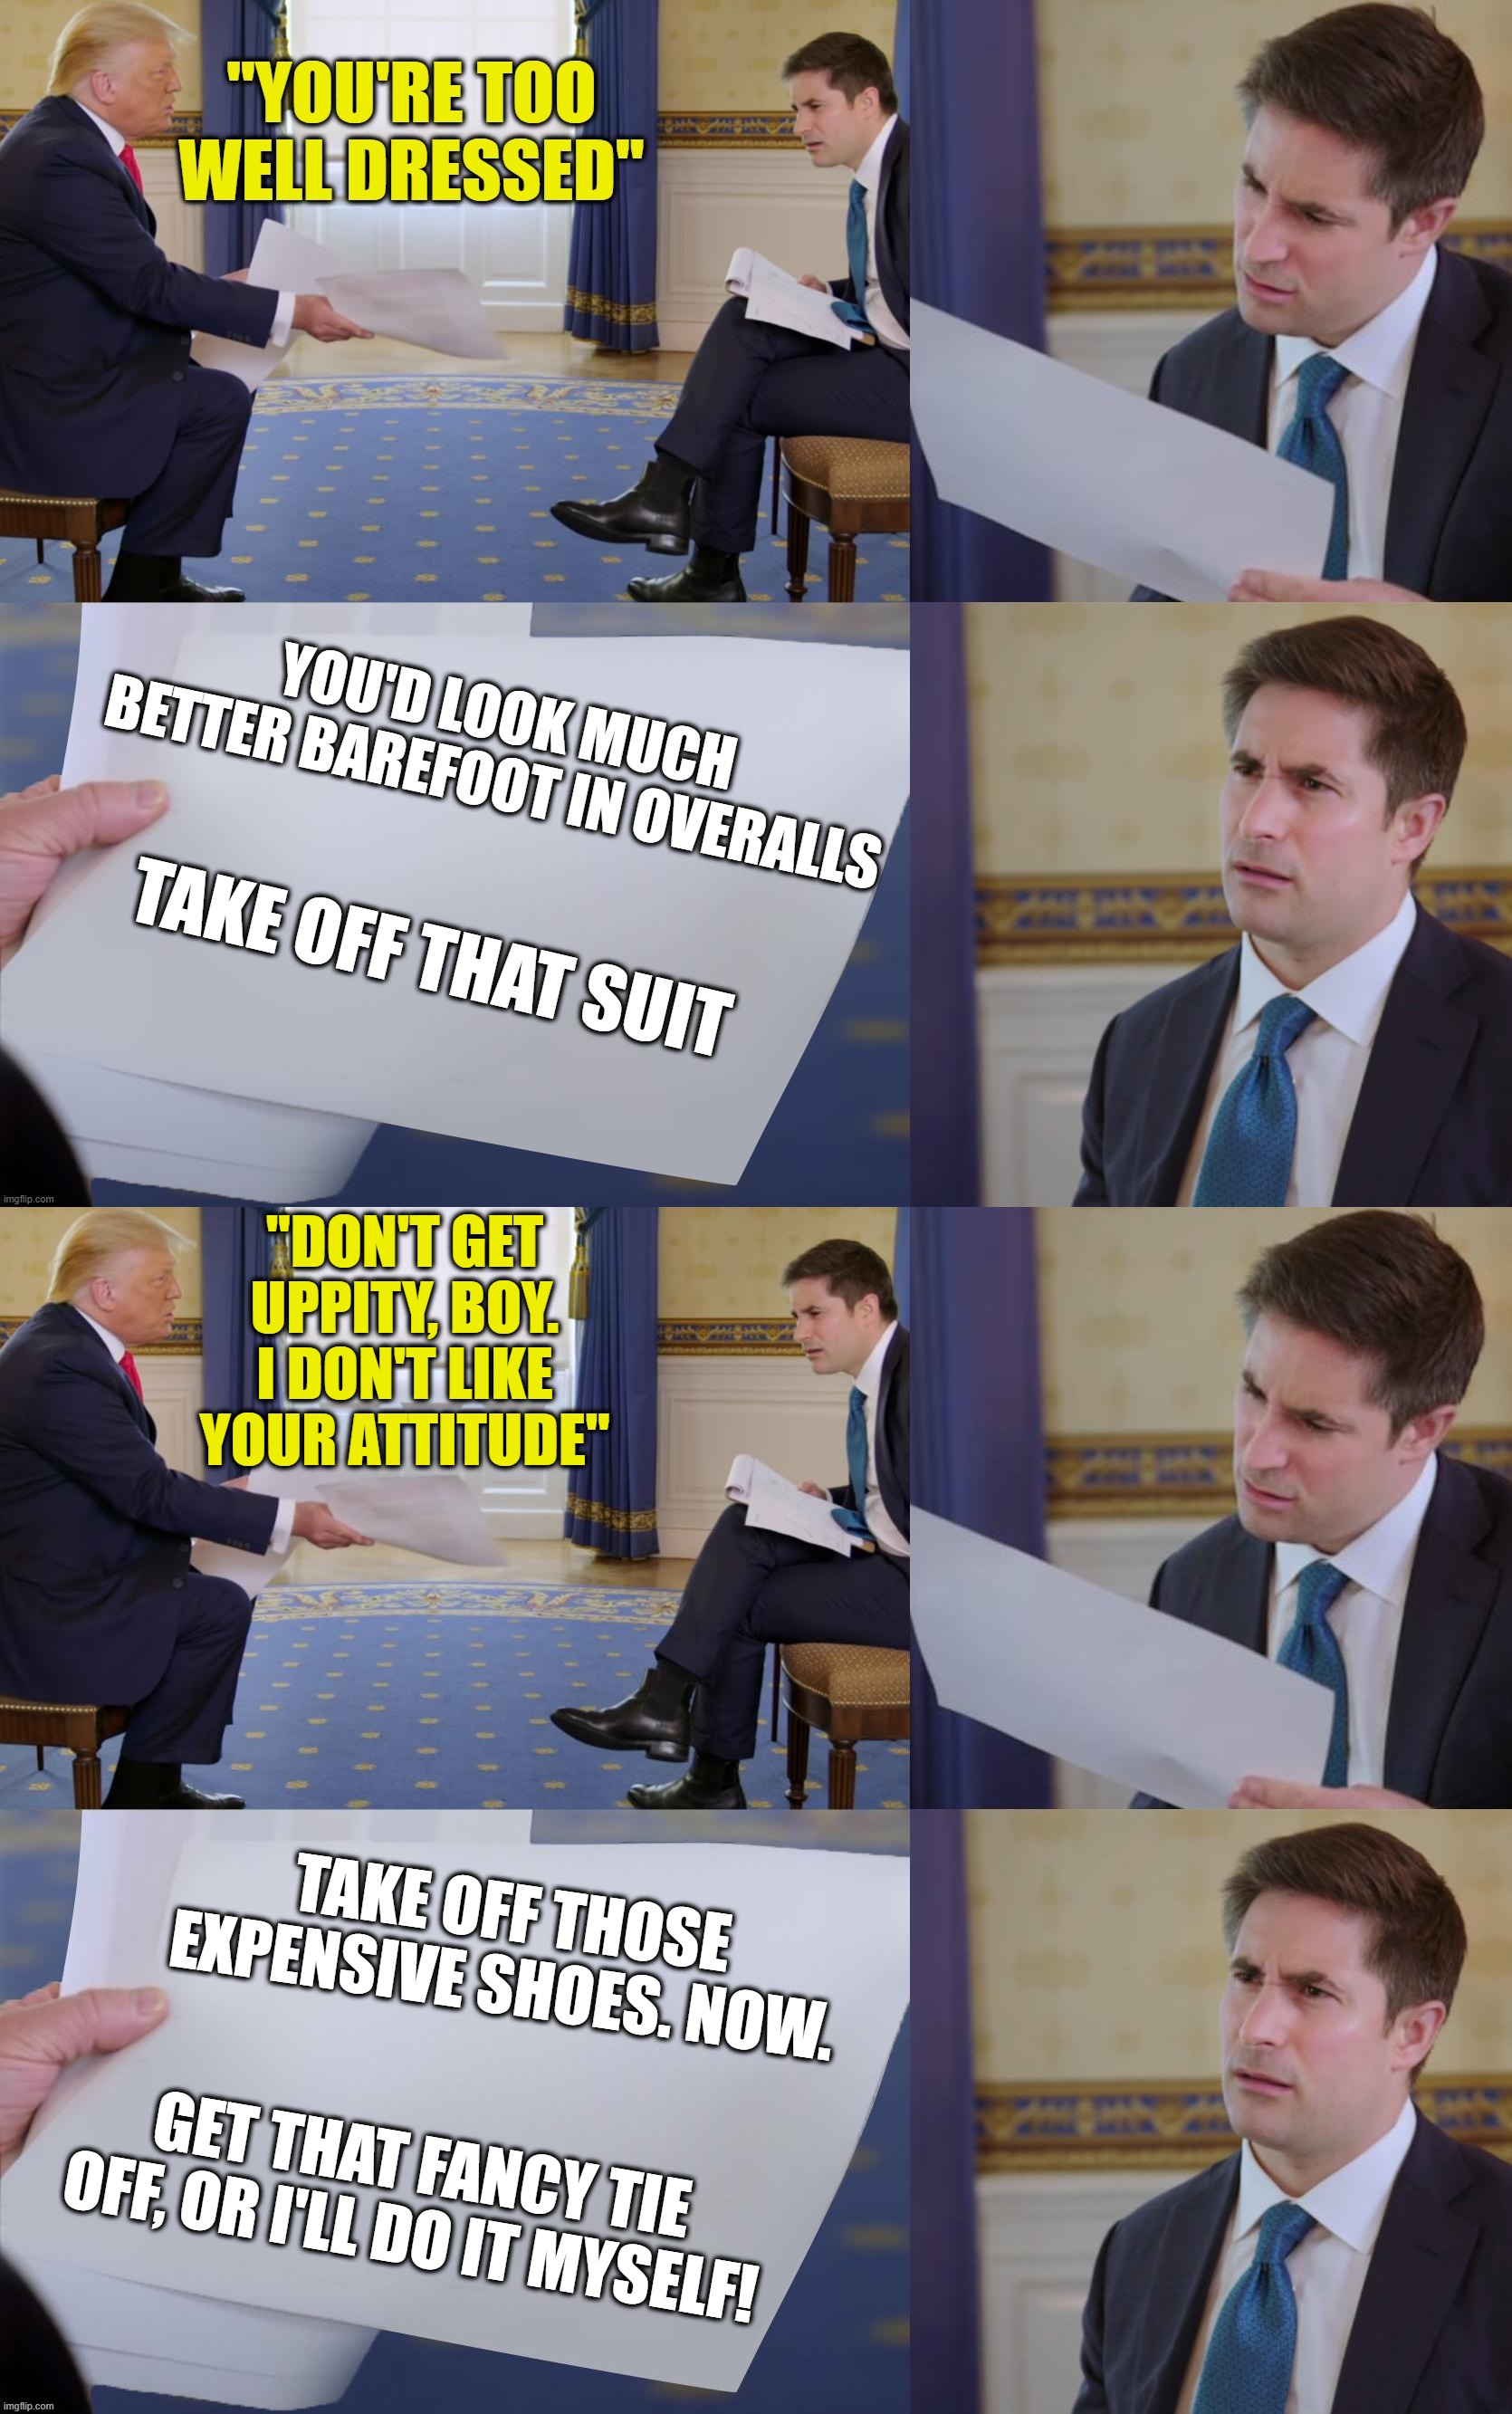 Strict Dress Code Instructions | "DON'T GET UPPITY, BOY. I DON'T LIKE YOUR ATTITUDE"; TAKE OFF THOSE EXPENSIVE SHOES. NOW. GET THAT FANCY TIE OFF, OR I'LL DO IT MYSELF! | image tagged in politics | made w/ Imgflip meme maker